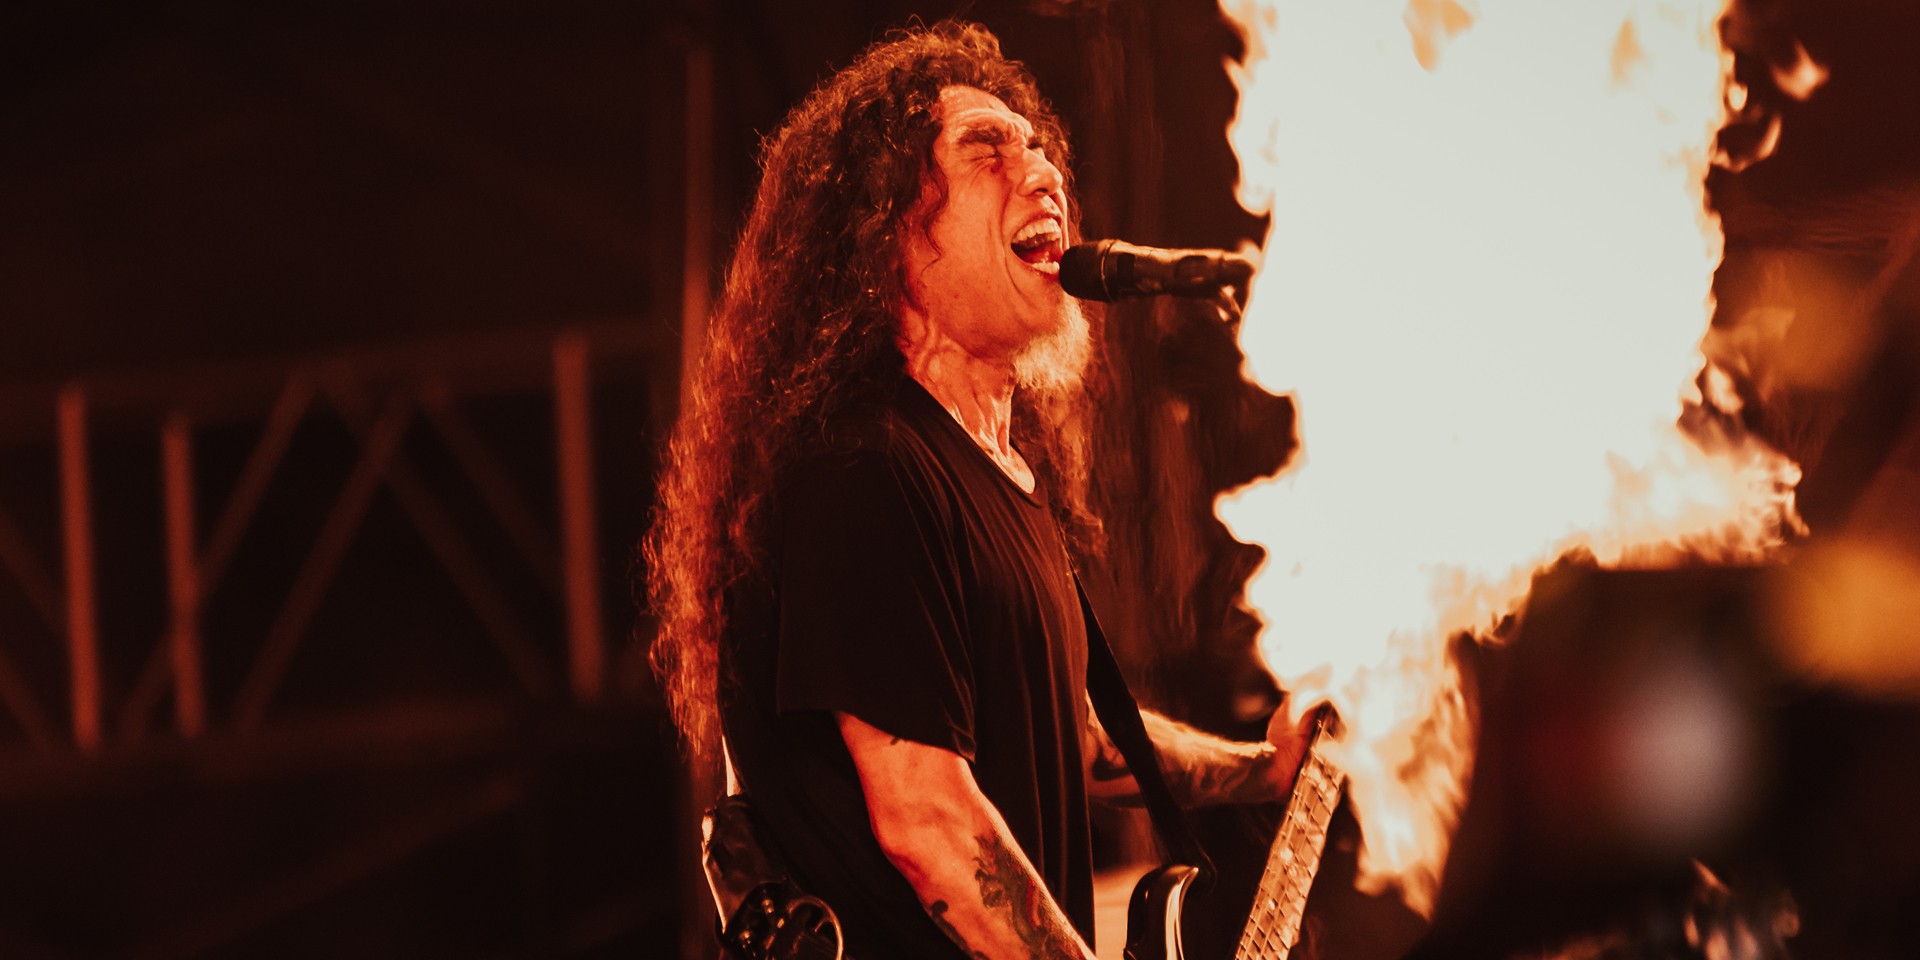 Slayer, Thy Art Is Murder, SikTh, Emmure, and more reign in glory at PULP SUMMER SLAM XIX – photo gallery